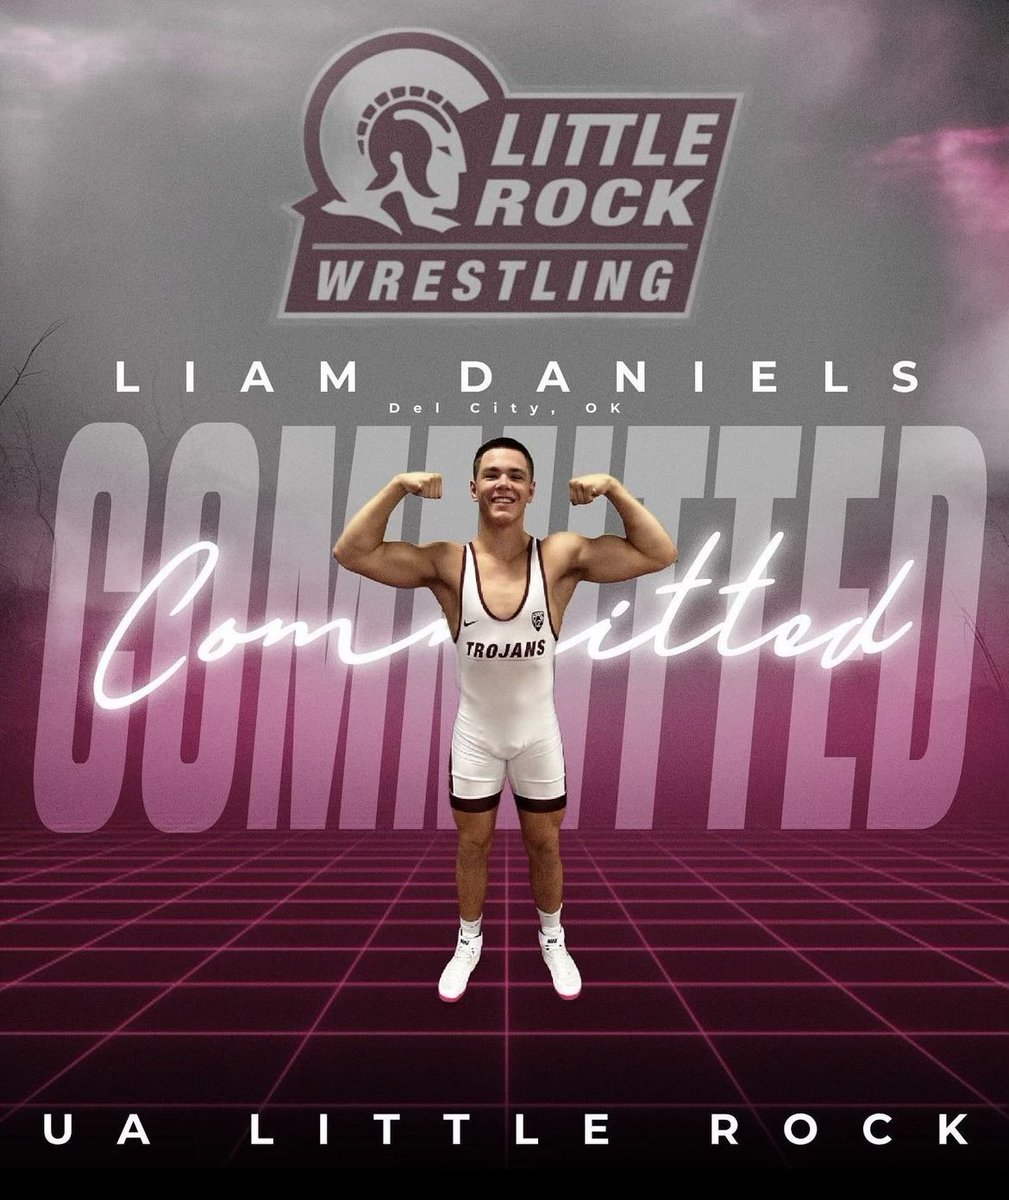 Del City’s Liam Daniels will continue his academic and wrestling career at Little Rock. Congrats Liam!